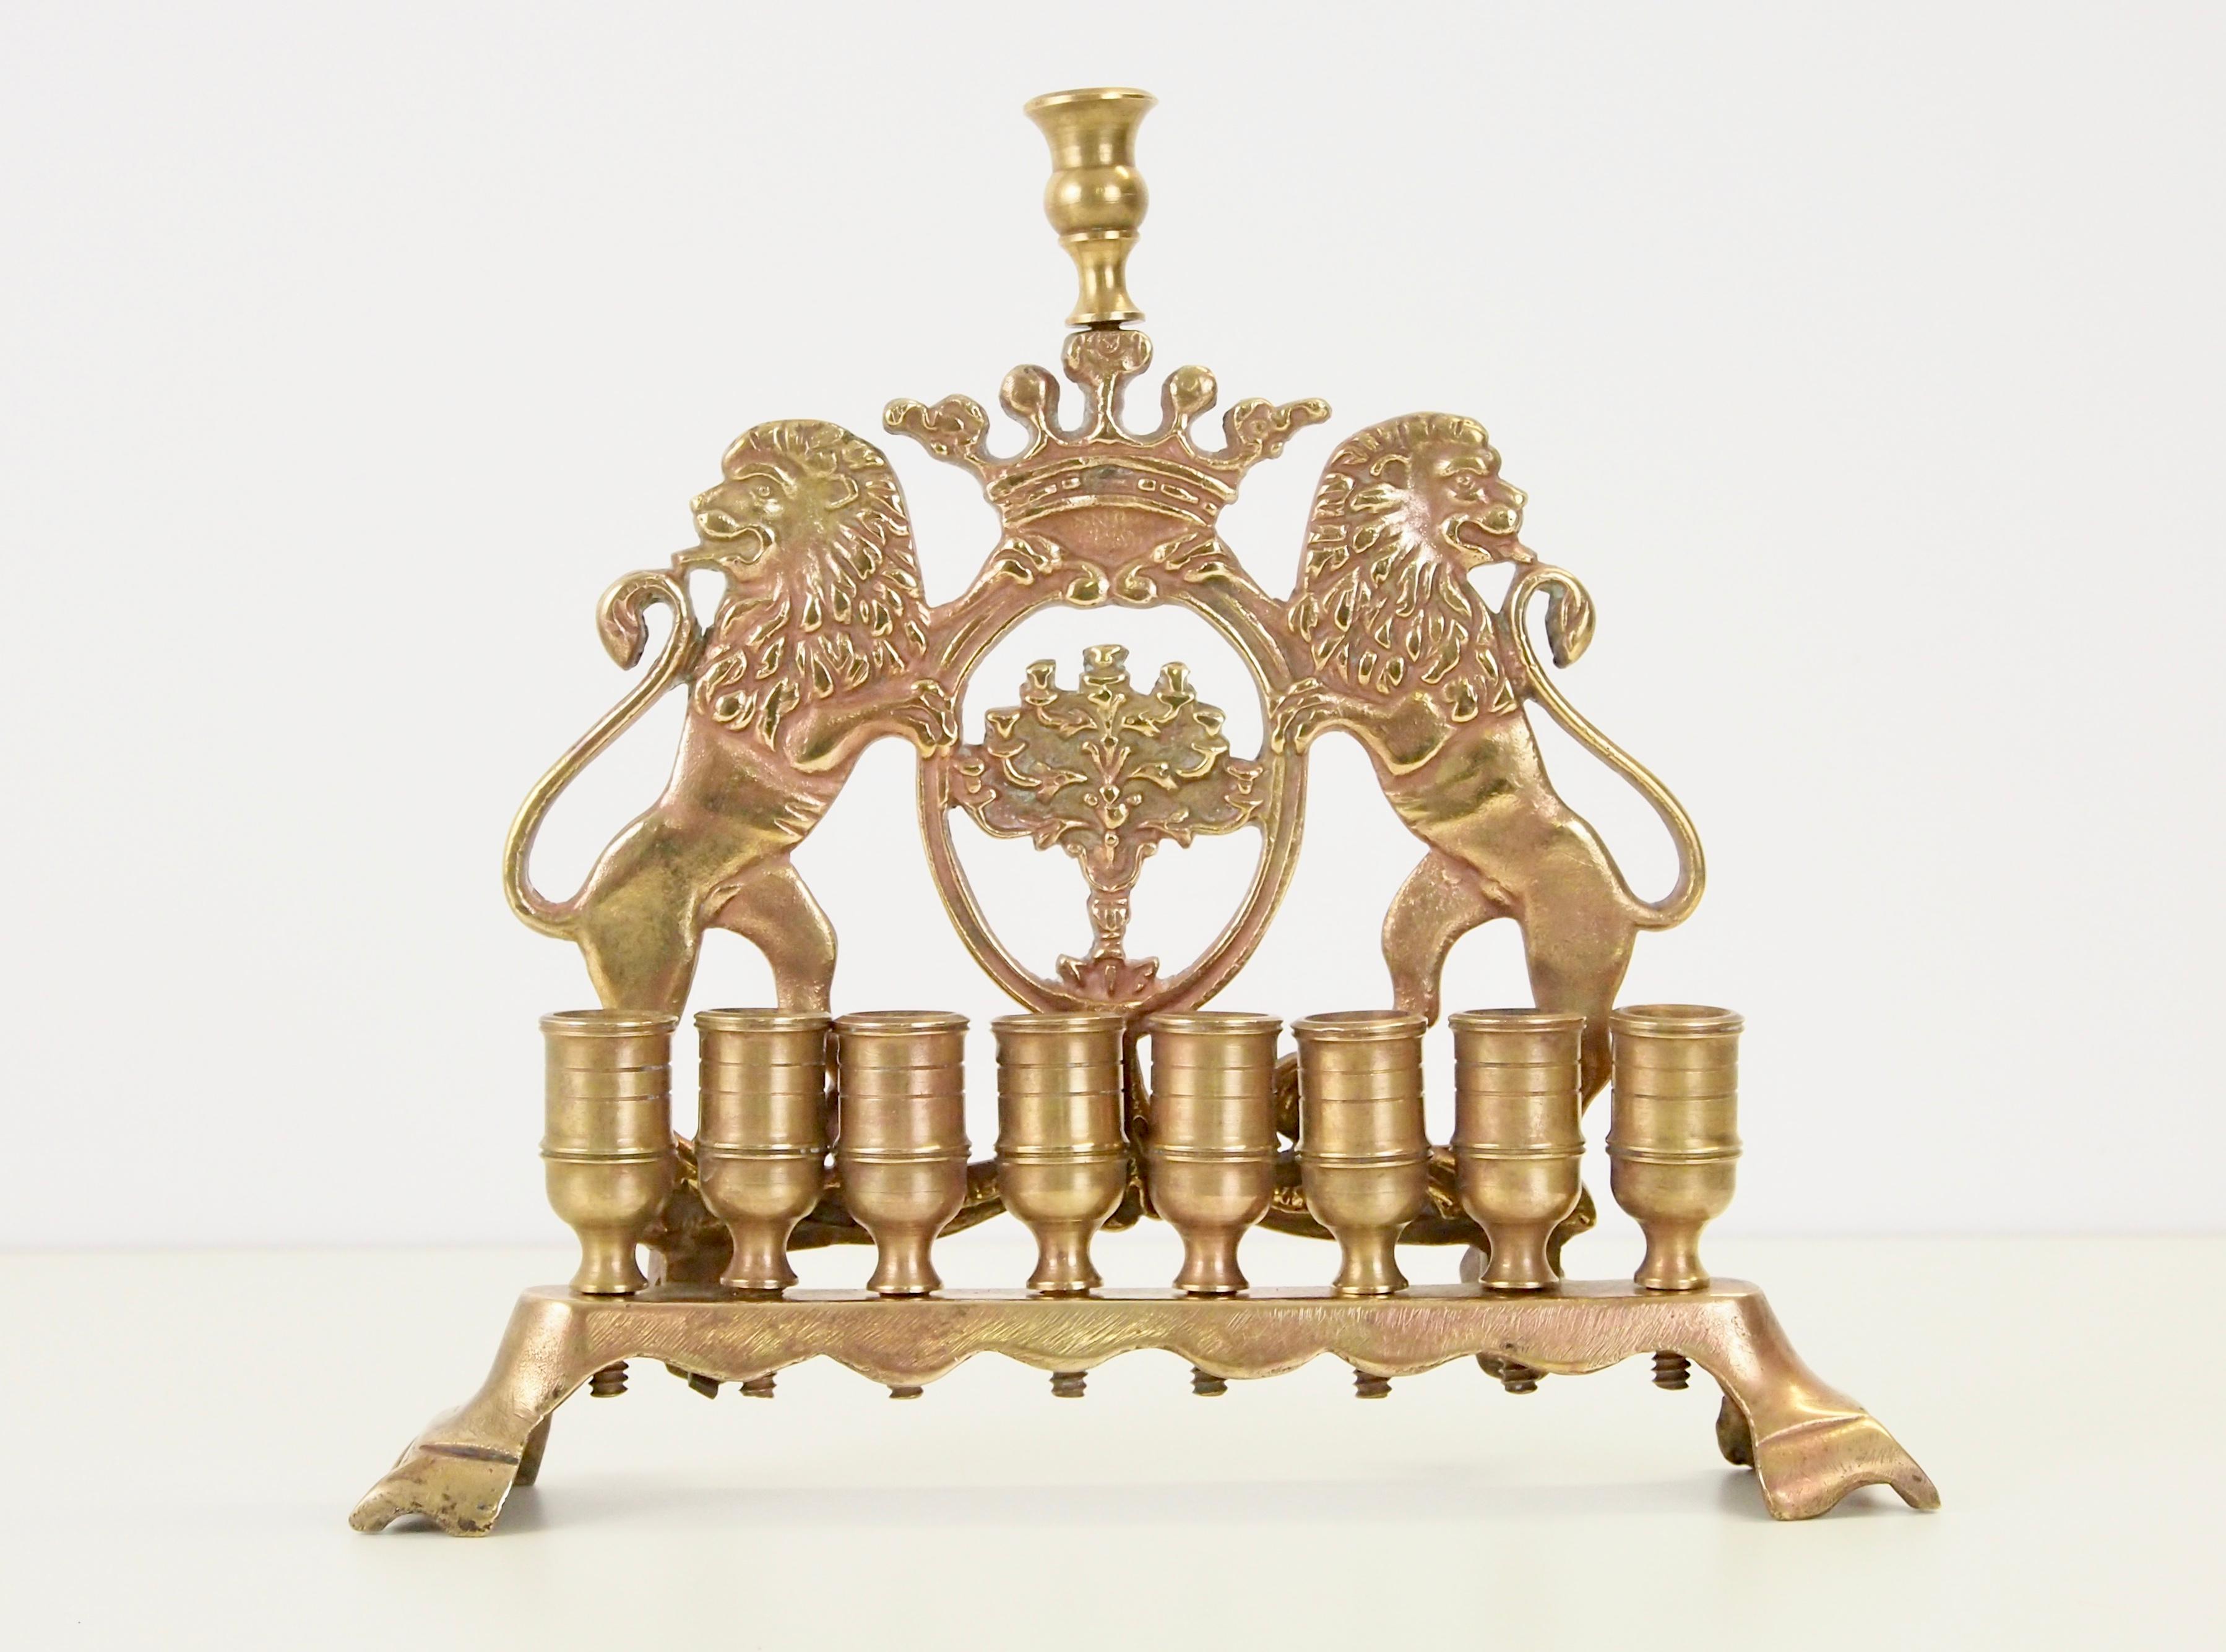 Magnificent and finely detailed rampant Judaica lions with full manes decorate this Chanukah Menorah. This Chanukah is based on 18th century Menorah from Lithuania.

Seen the signature at the back this Chanukah dates from 1820.
There is still